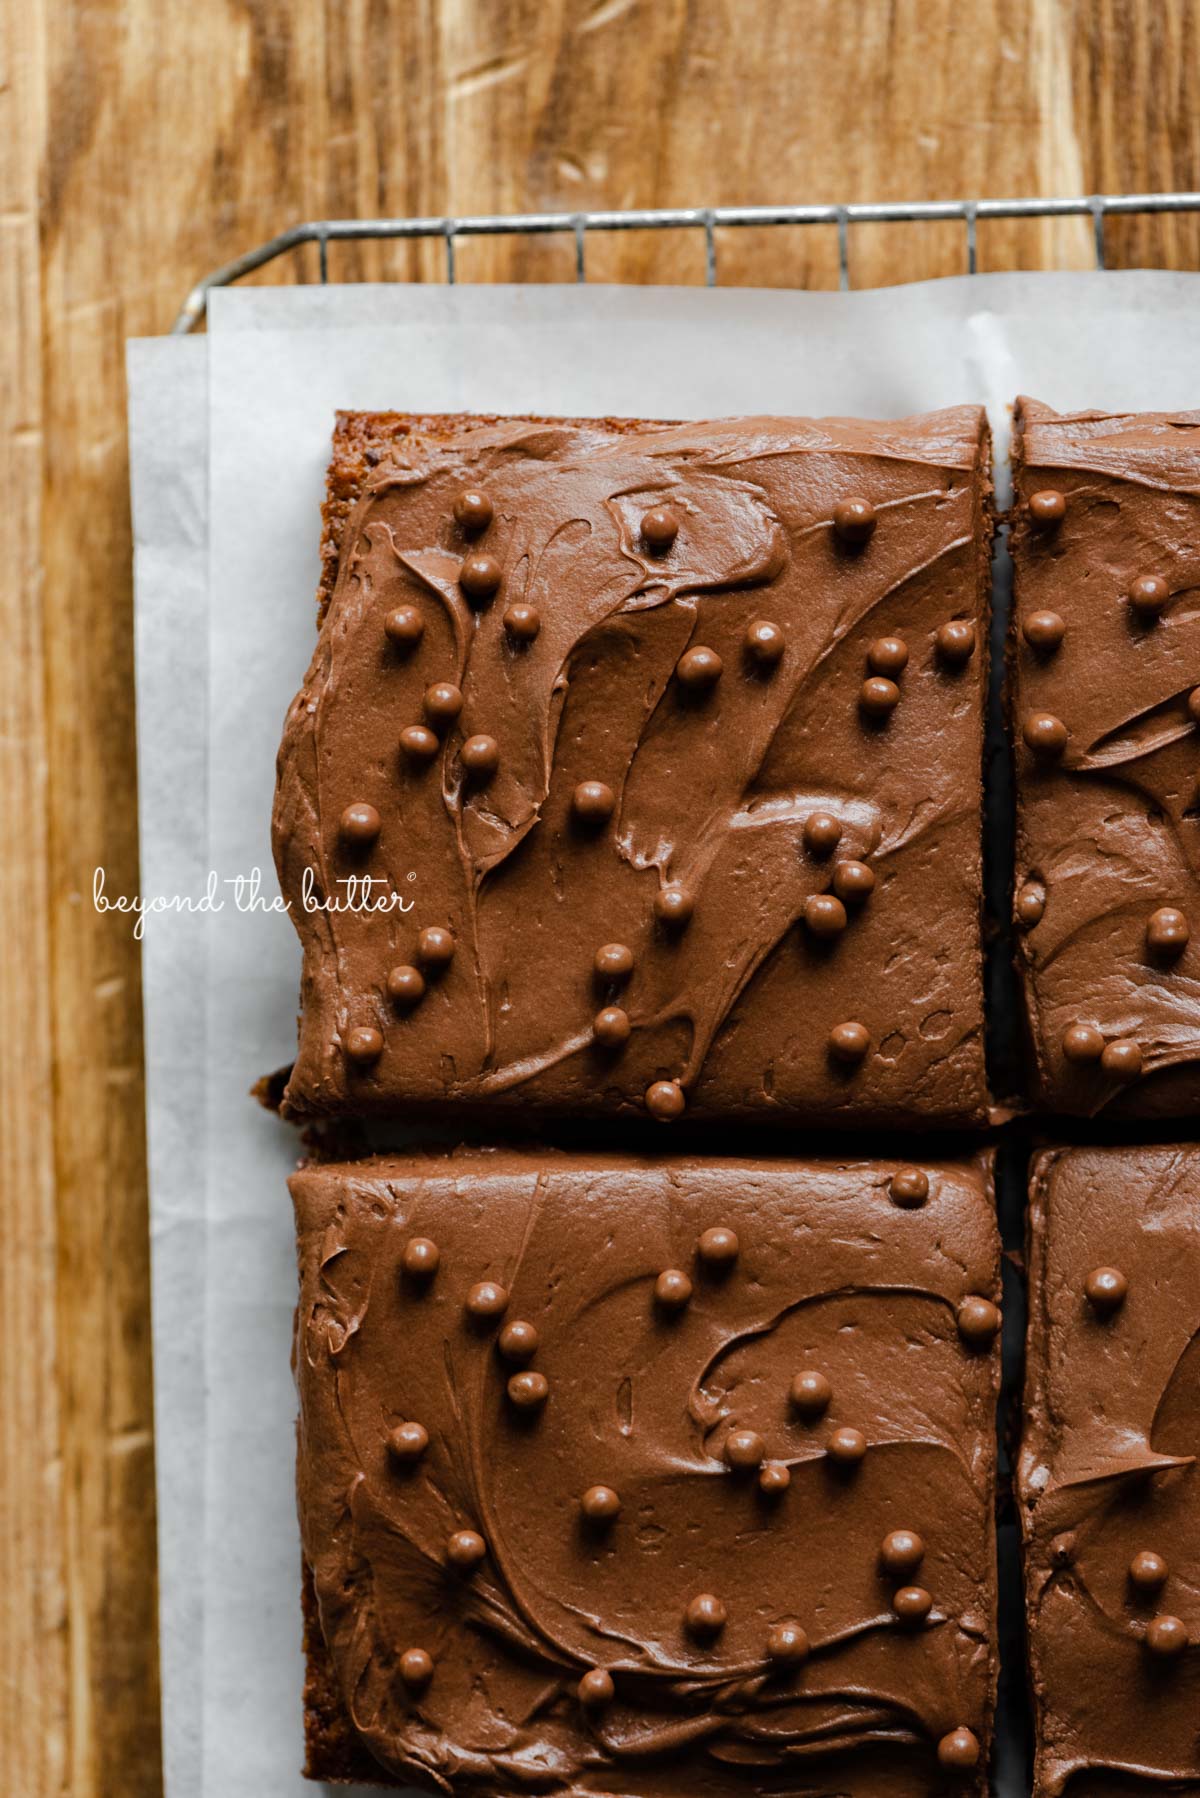 4 square slices of banana chocolate chip snack cake with chocolate cream cheese frosting on parchment paper and wire cooling rack | All images © Beyond the Butter®